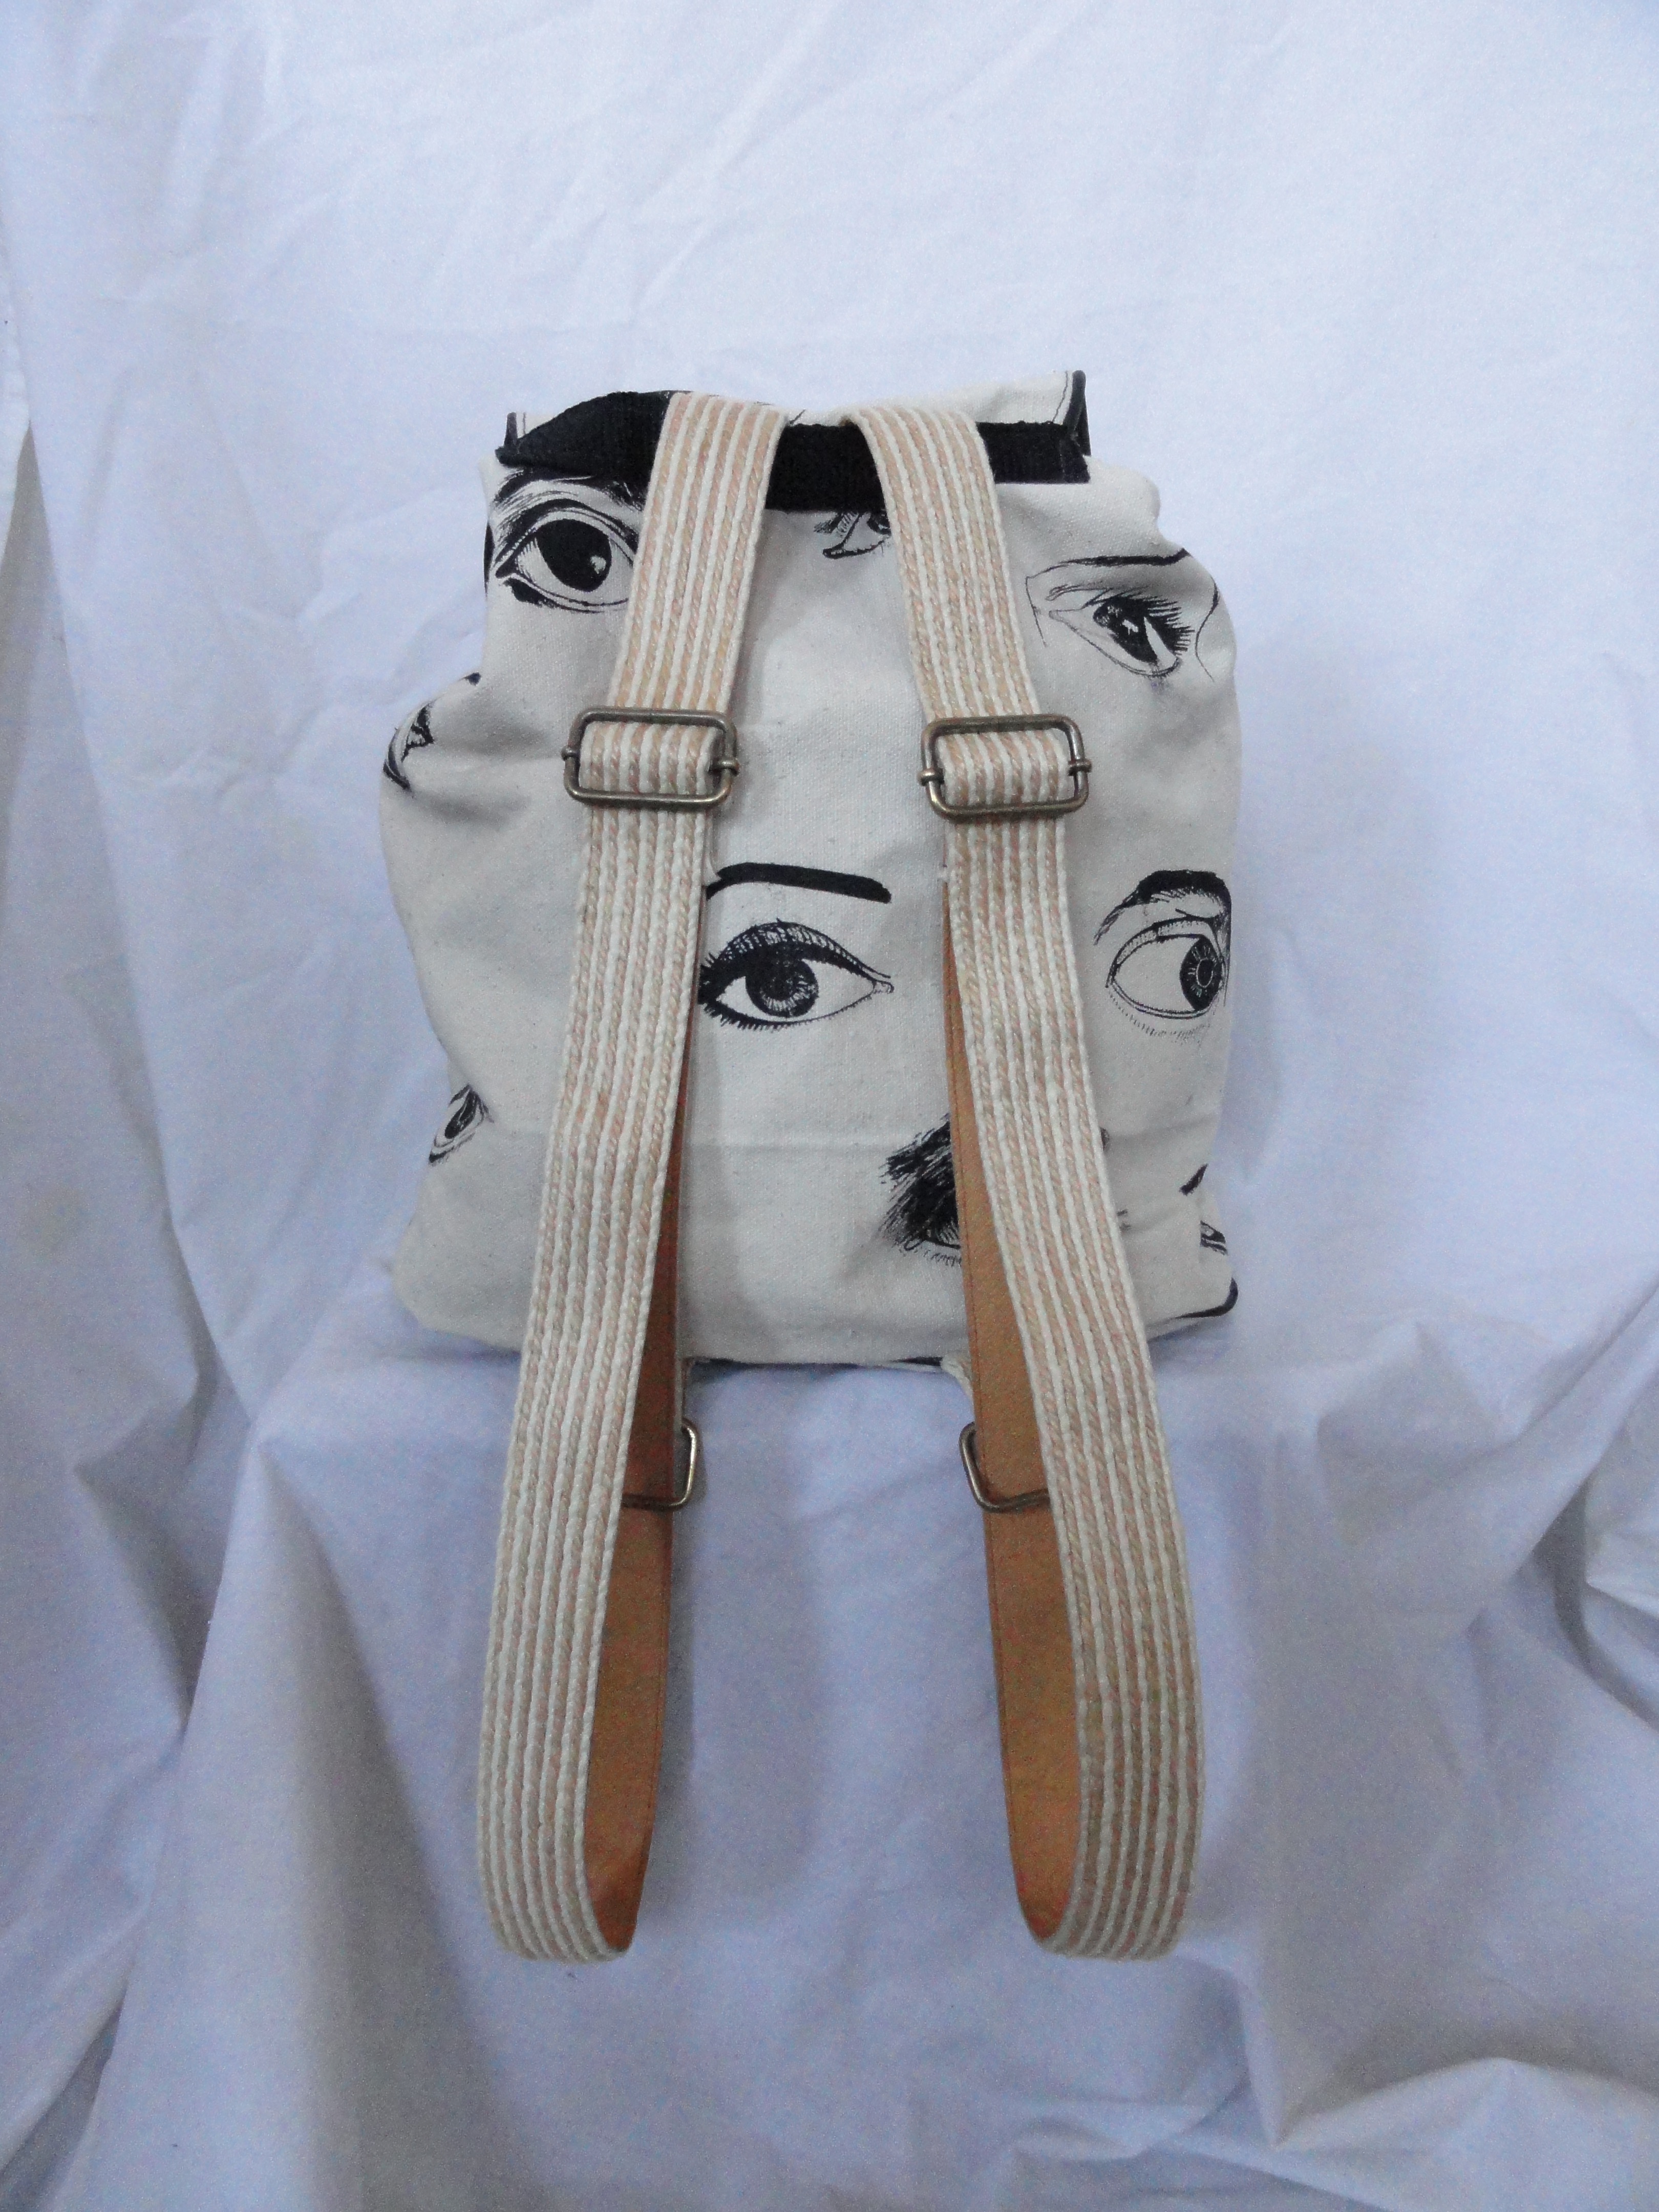 backpack with an eye pattern on it